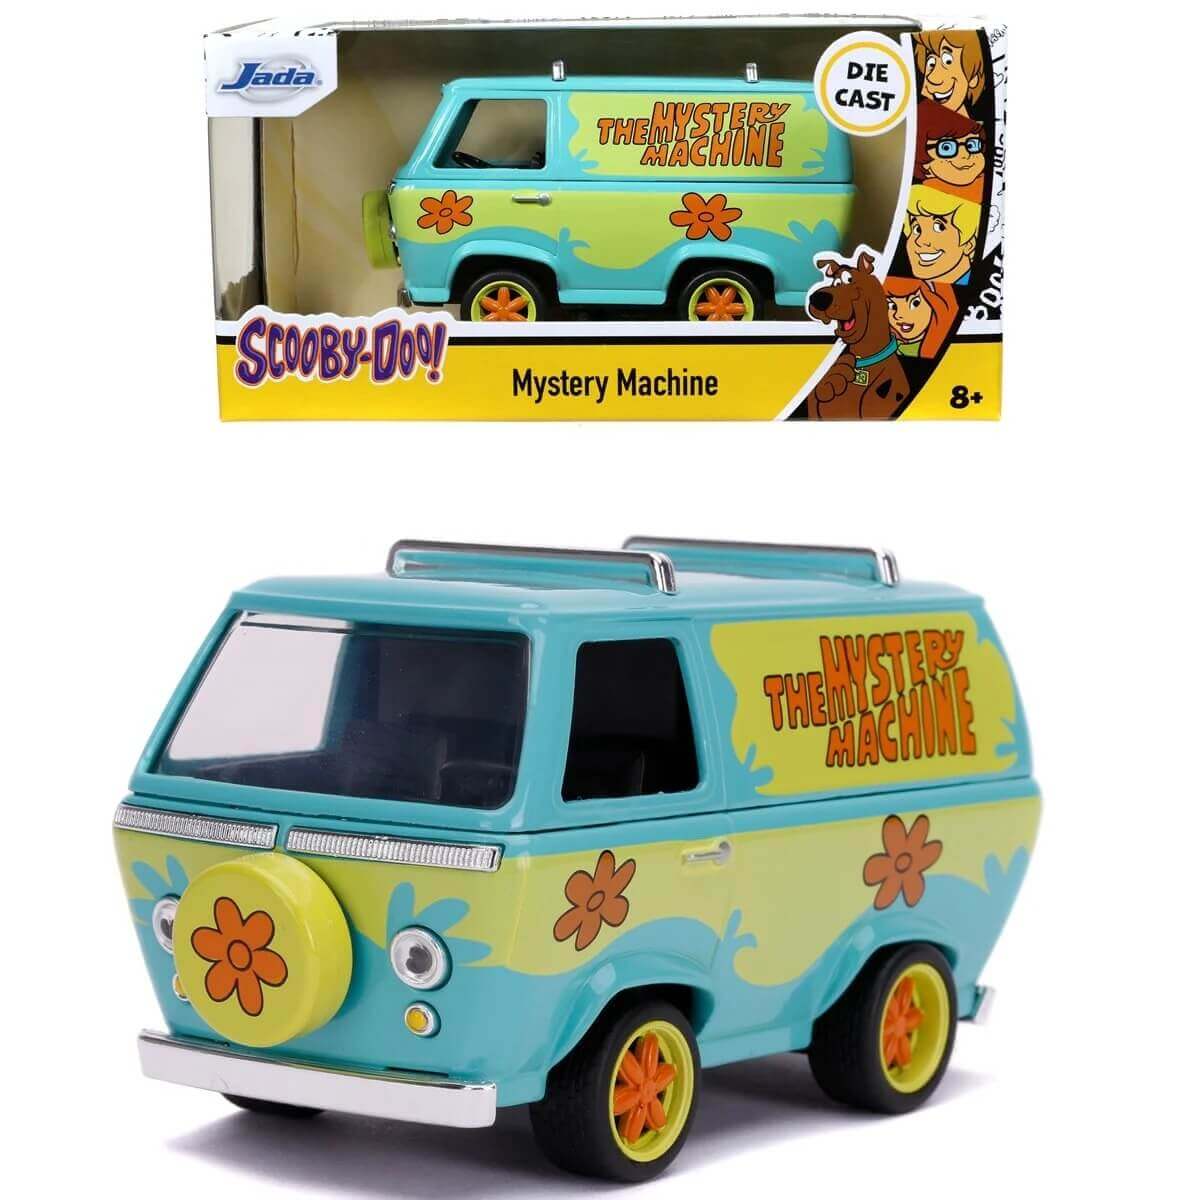 Scooby-Doo & The Gang Mystery Machine, Add Name Metal Lunch Box